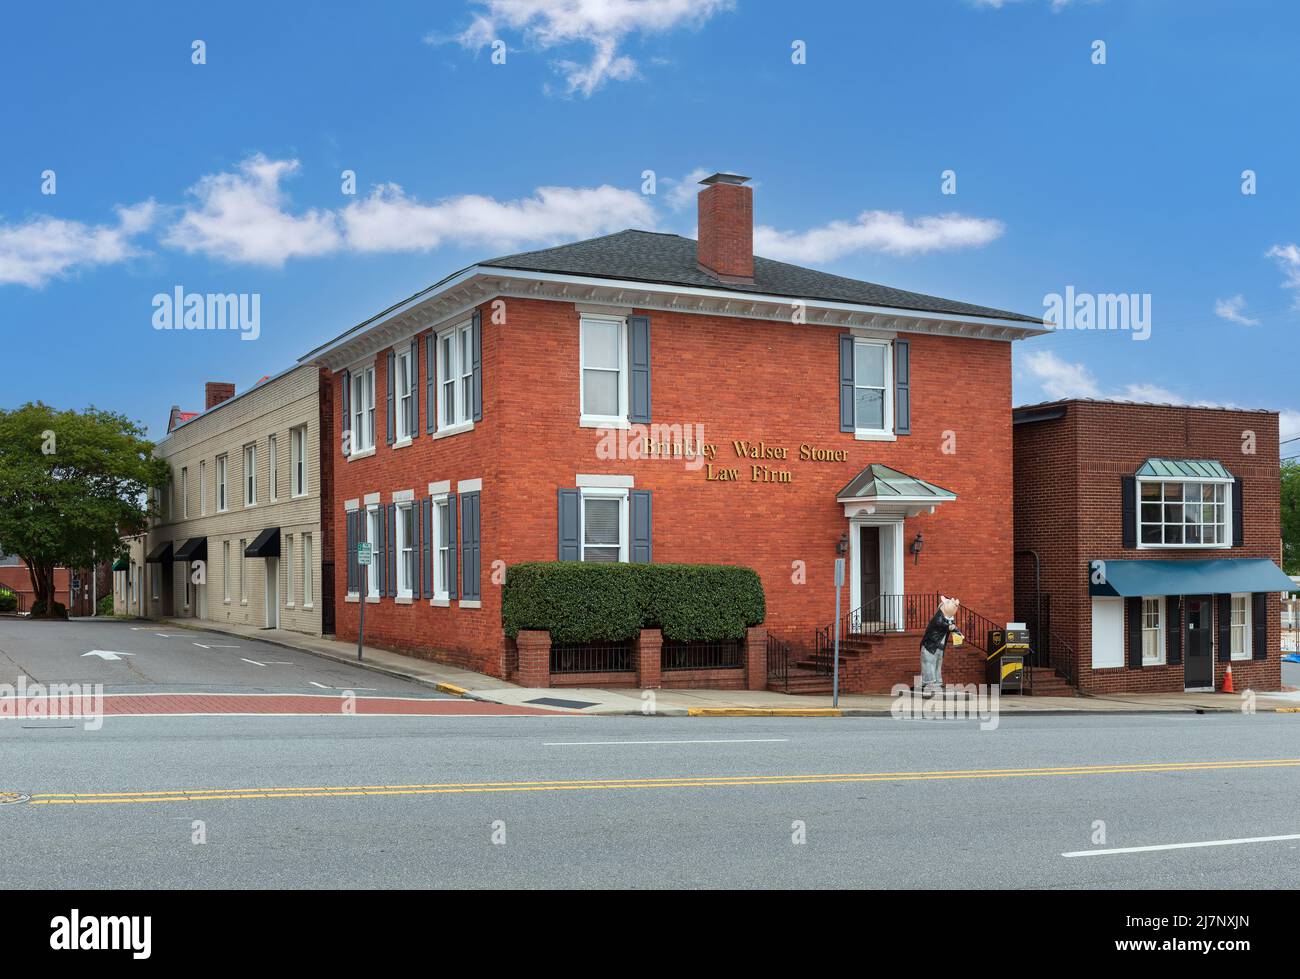 LEXINGTON, NC, USA-8 MAY 2022: Brinkley Walser Stoner Law Firm Building in Downtown. Stockfoto